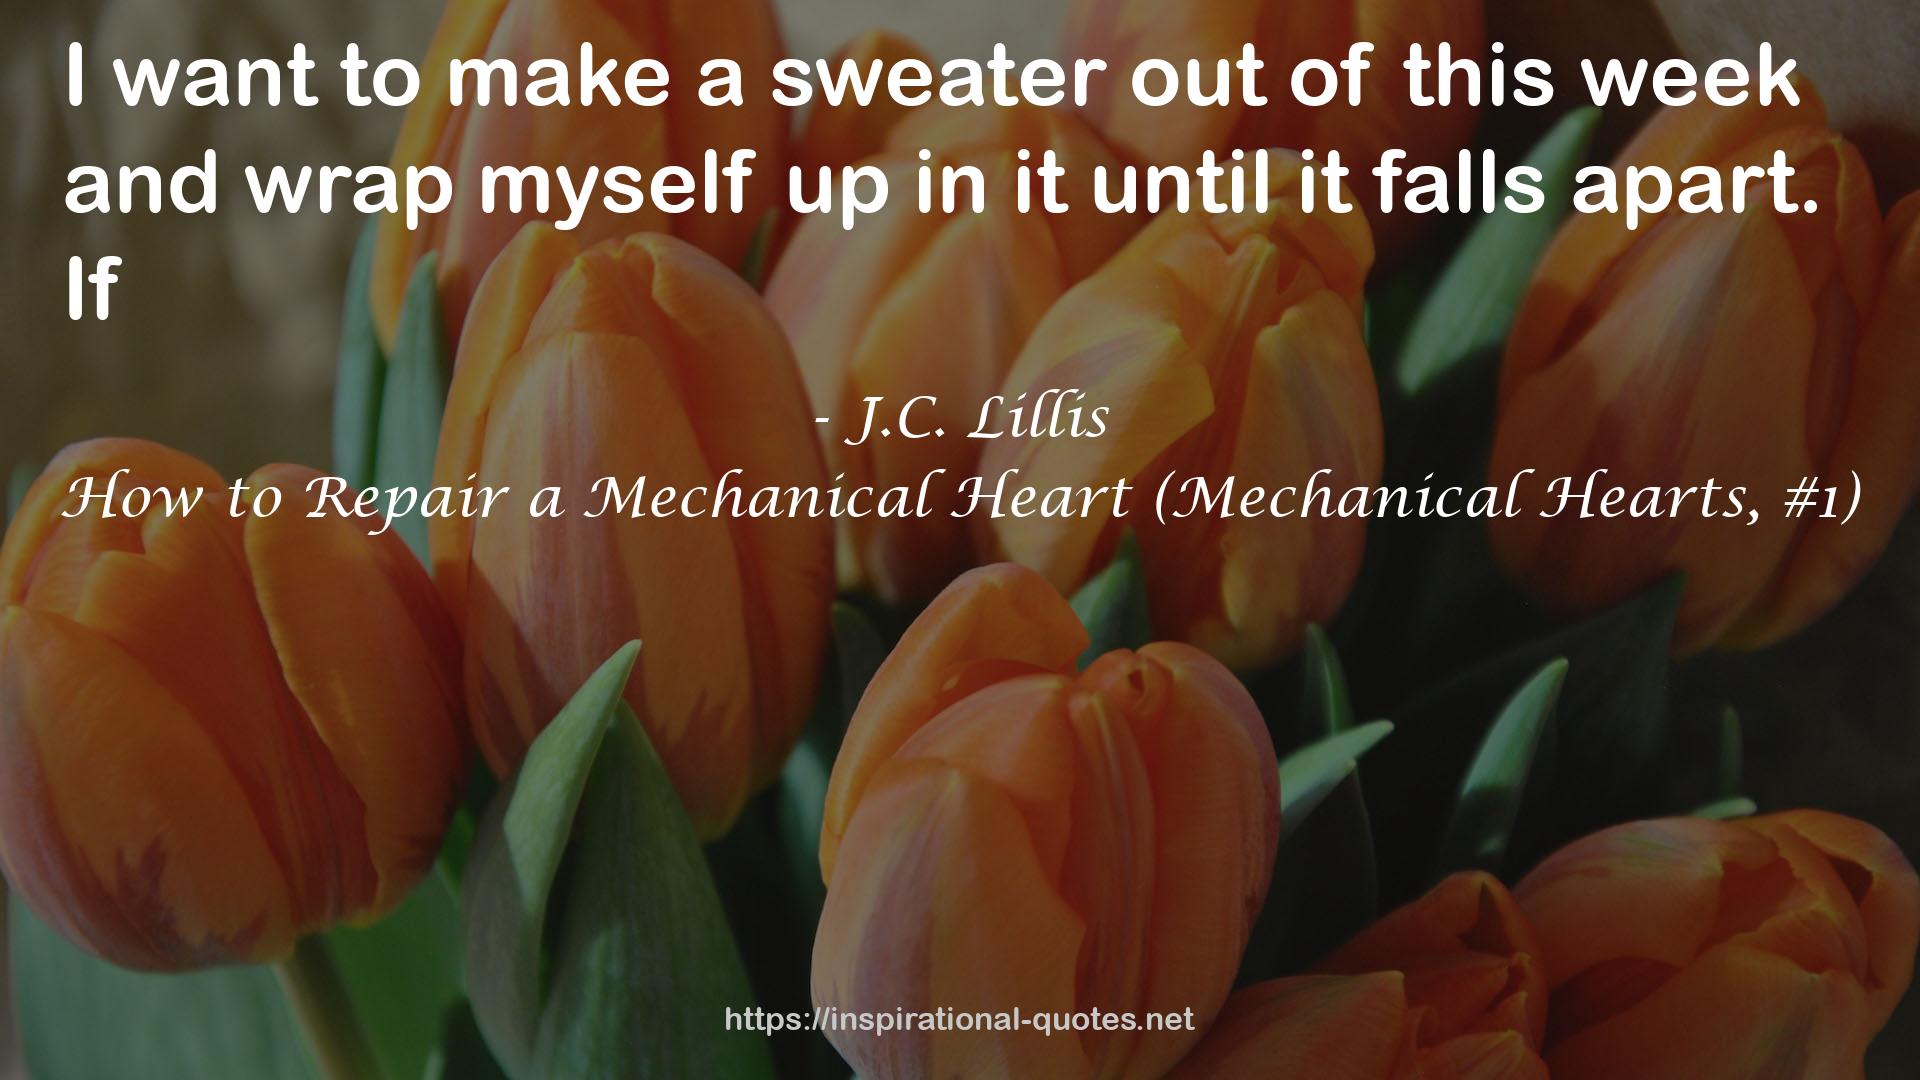 How to Repair a Mechanical Heart (Mechanical Hearts, #1) QUOTES